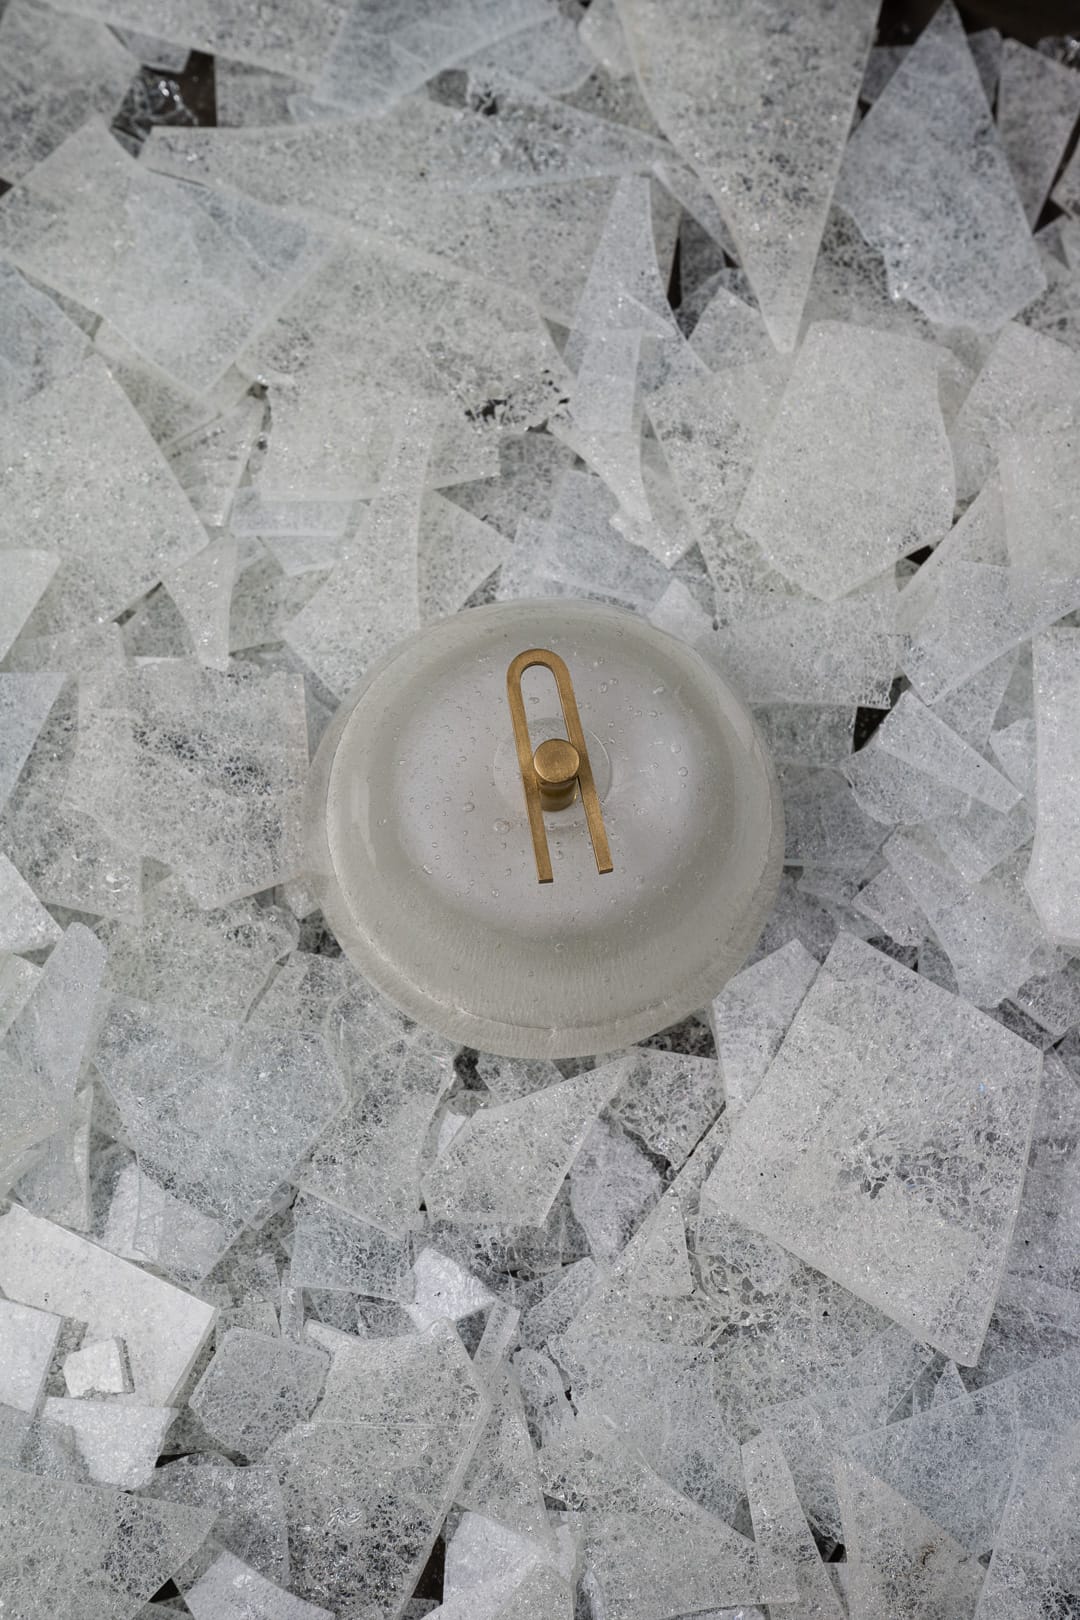 Point Five by South Drawn. Image copyright of South Drawn. Domed light sitting on bed of crackled glass shards. Light has gold pin on front.